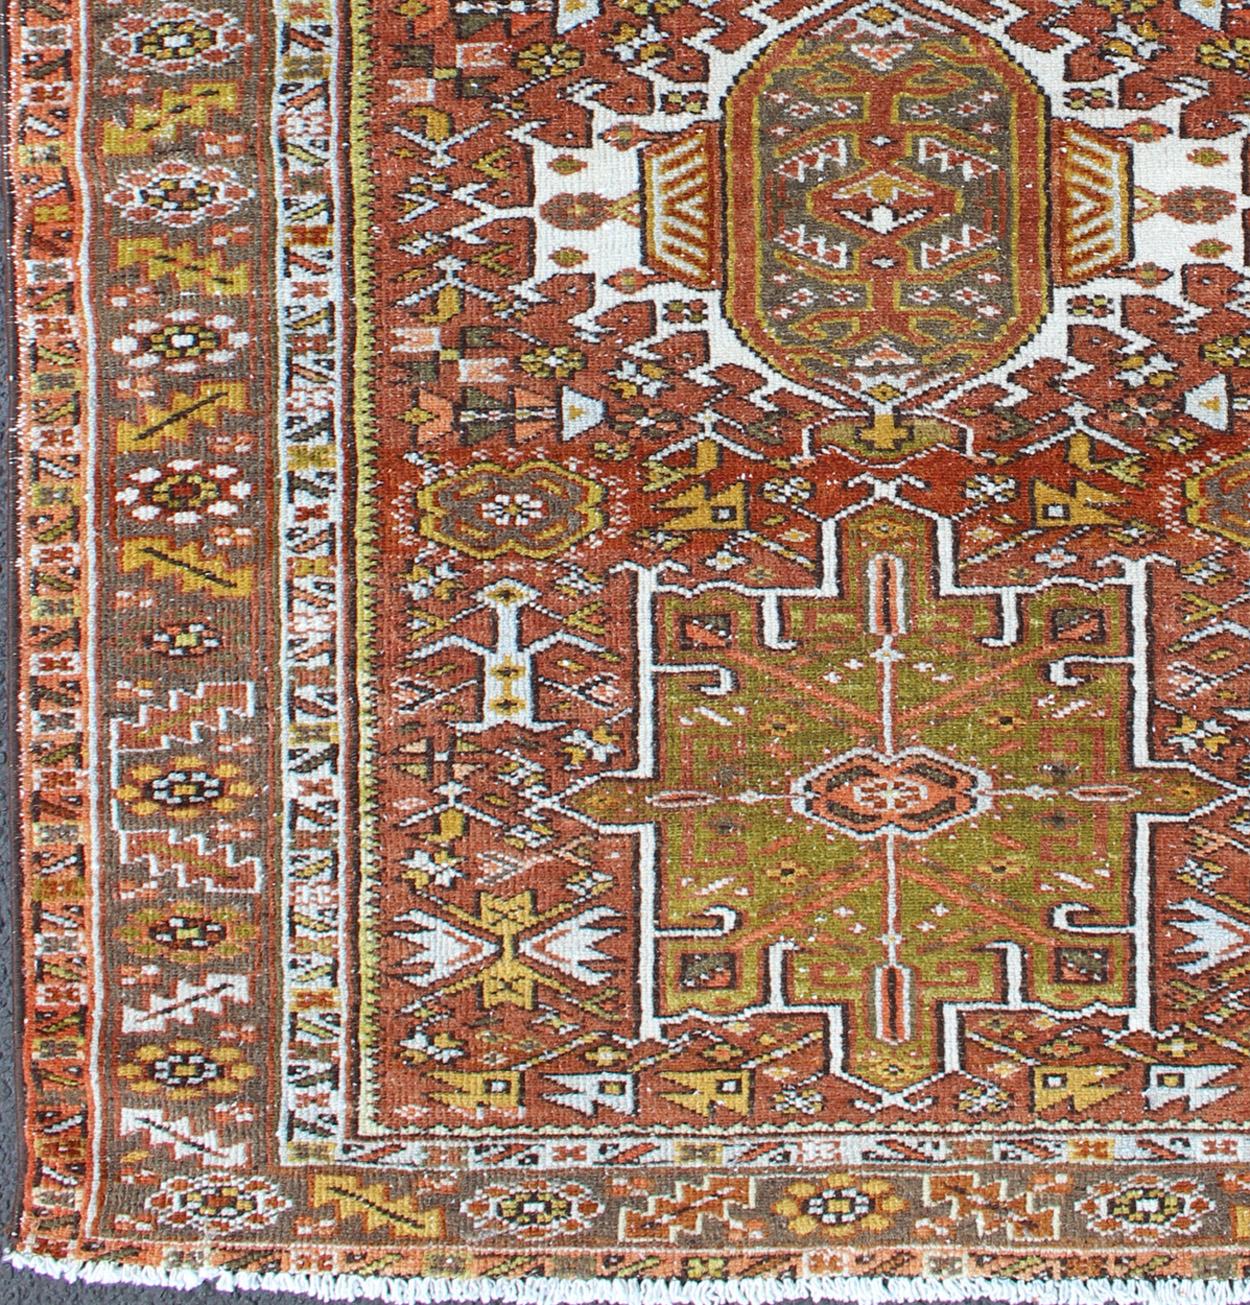 Geometric layered Medallion design antique Karadjeh rug from Persia in rust red and olive and sharp yellow green colors, rug gng-4736, country of origin / type: Iran / Karadjeh, circa 1920

This early 20th century, handwoven antique Persian Karadjeh